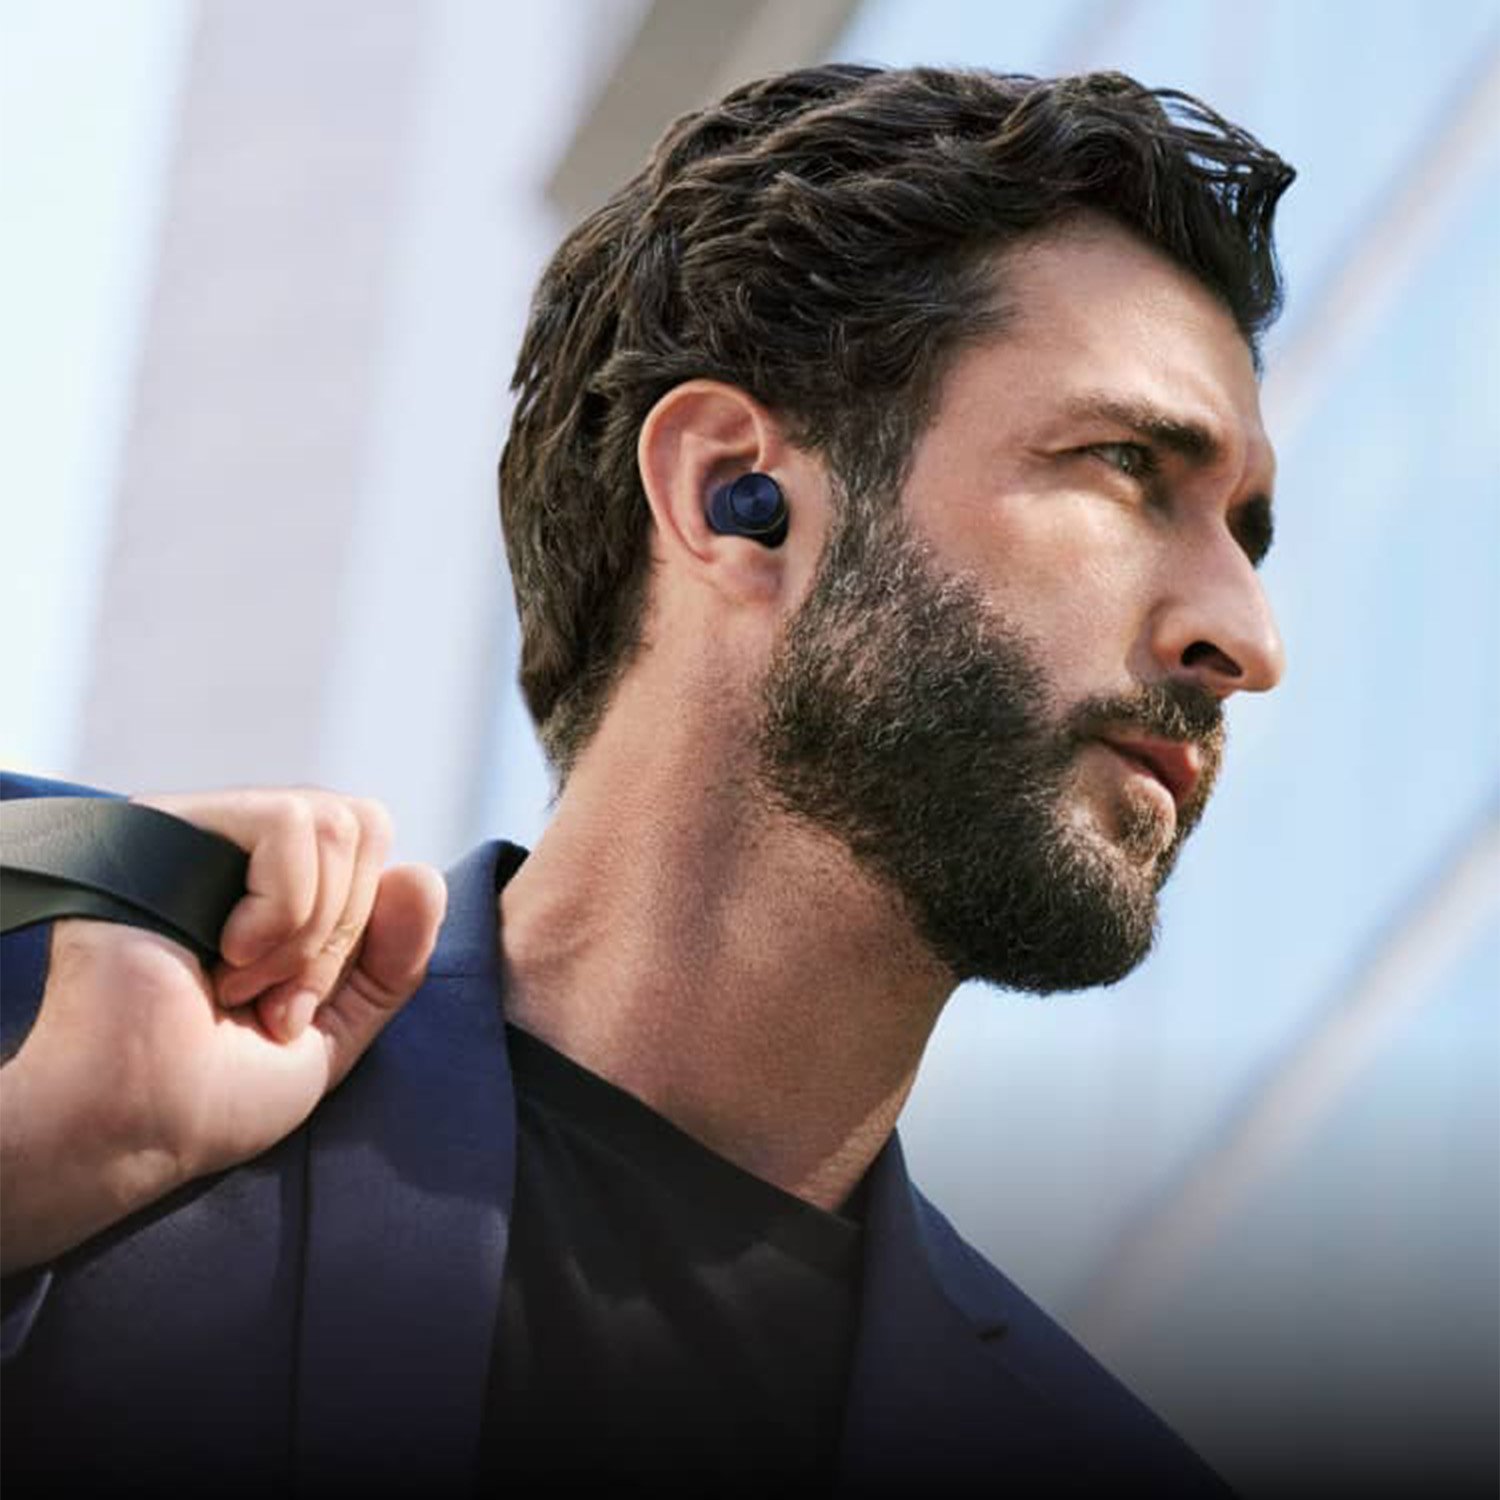 Bowers & Wilkins PI7 S2 Earbuds Review: Same Fantastic Sound, But